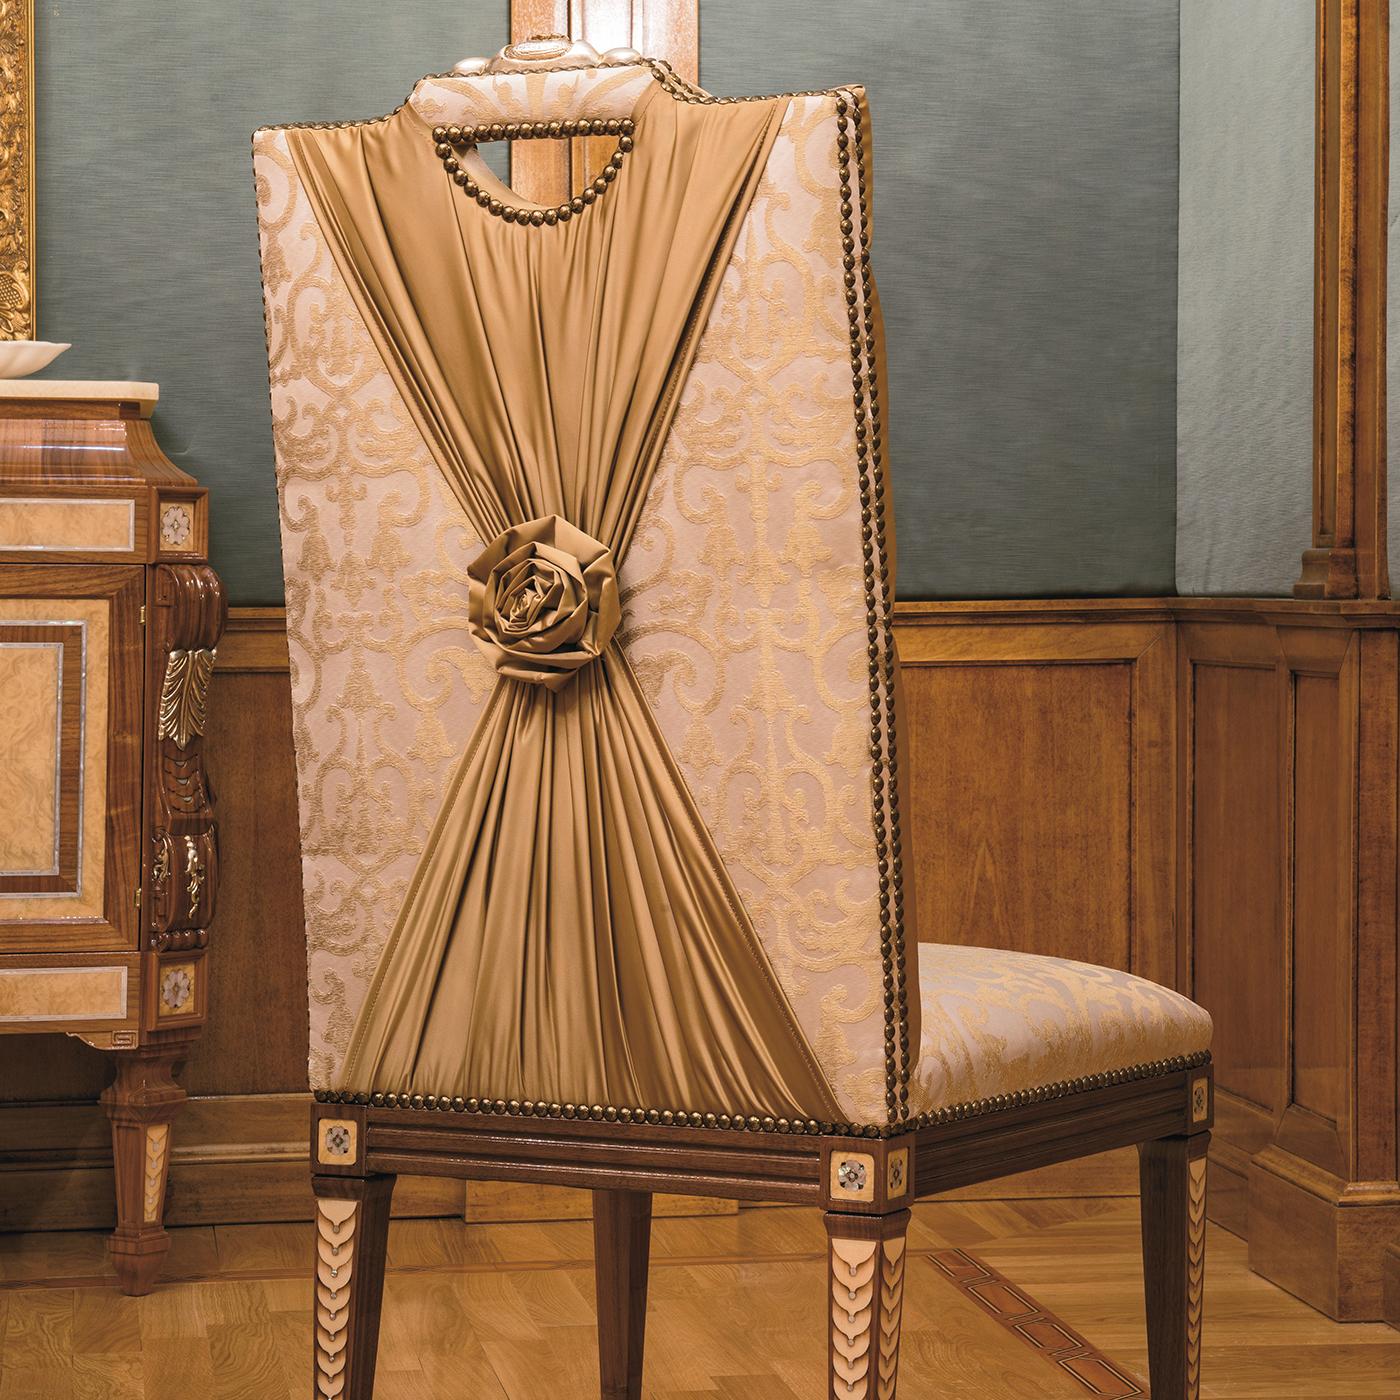 This splendid chair will create a visually alluring focal point in any classic living room, or paired with others around a luxurious dining table. Masterfully handcrafted of Canaletto walnut wood, the four legs are adorned with superb inlays in